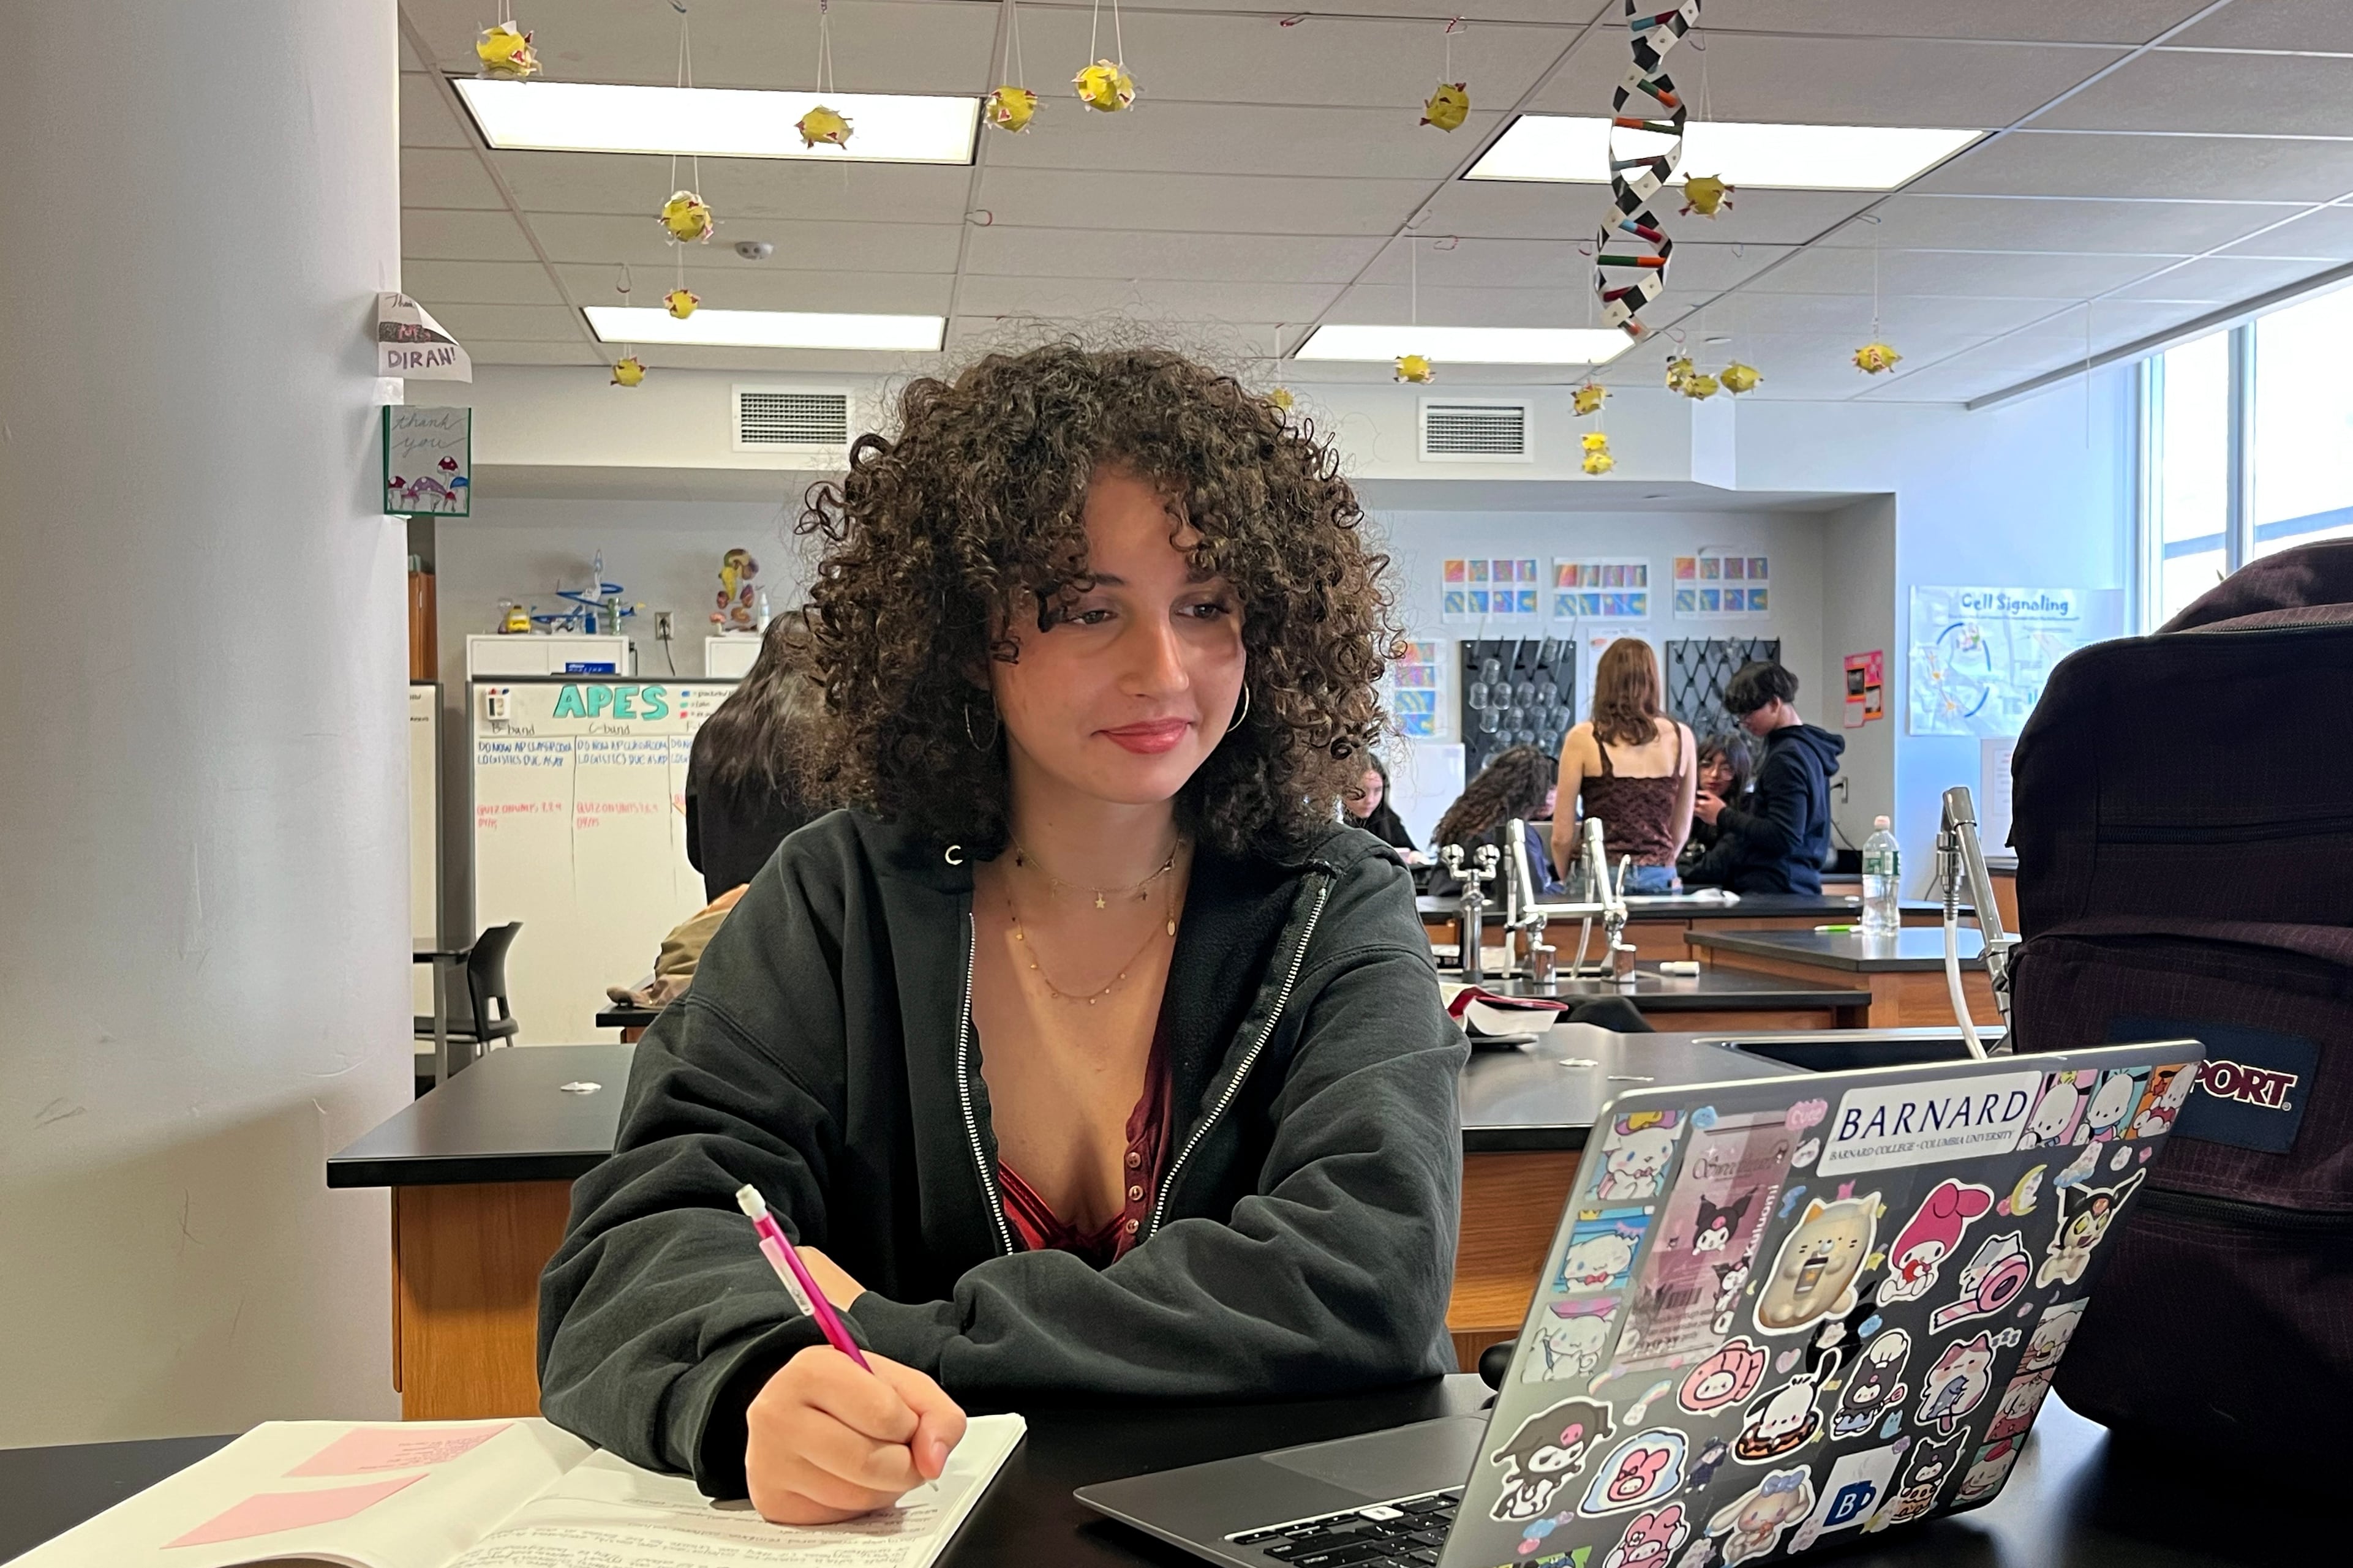 A high school student works at a desk writing in a notebook and looking at a laptop with other students in the background.